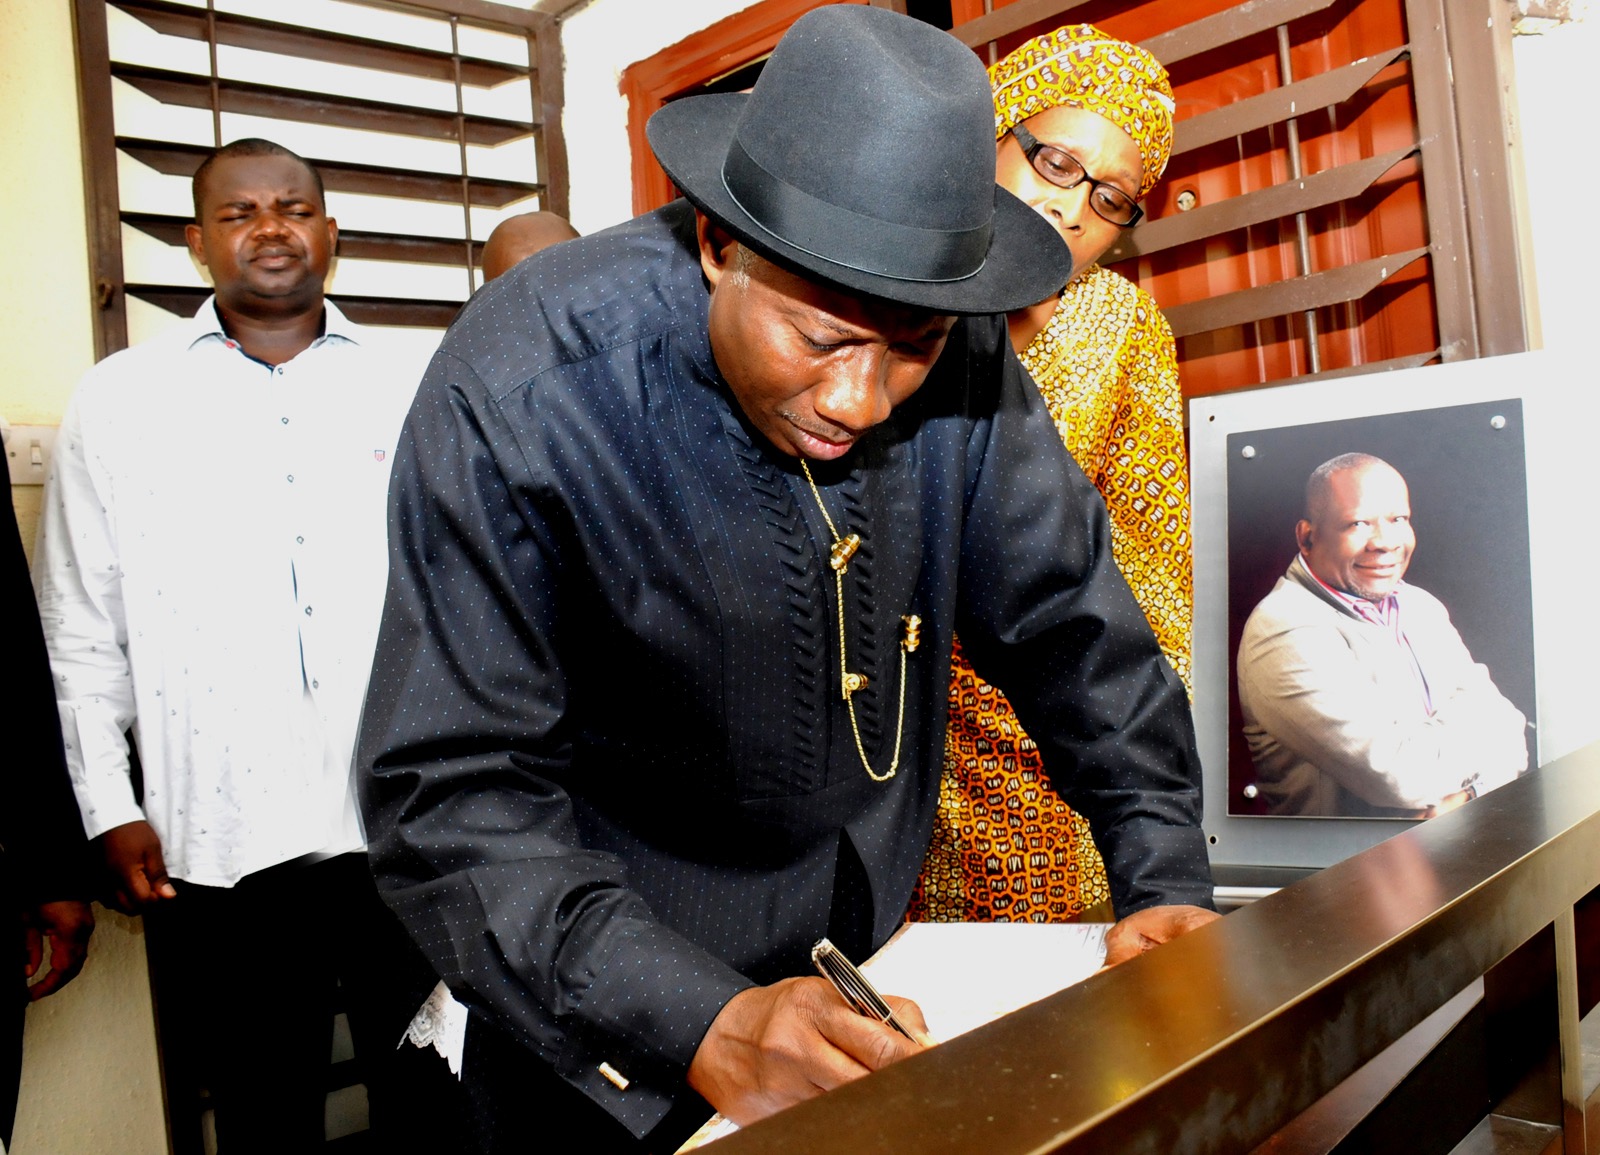 President Goodluck Jonathan signs condolence register at the home of Oronto Douglas on the day he died on April 9, 2015 (State House Photo)